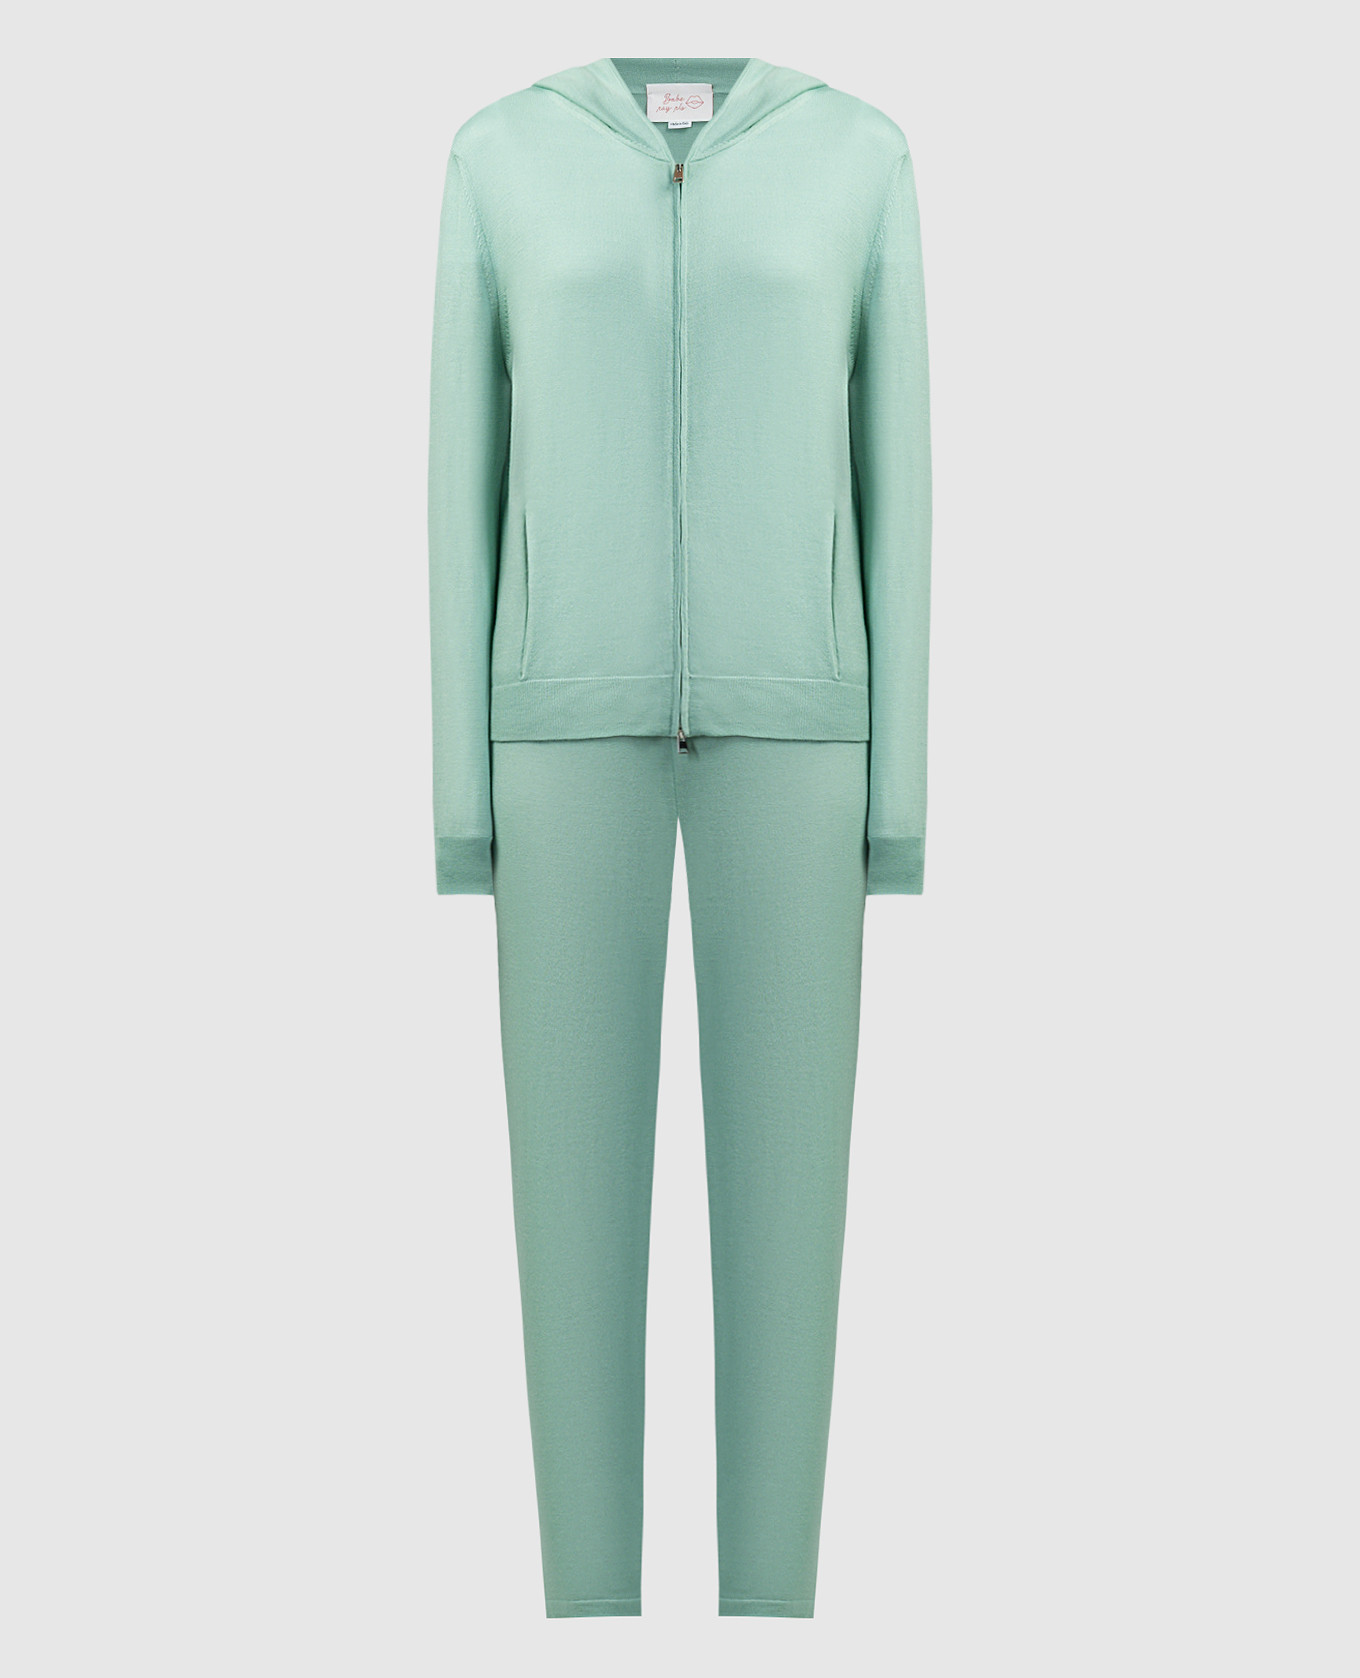 Green sports suit made of wool